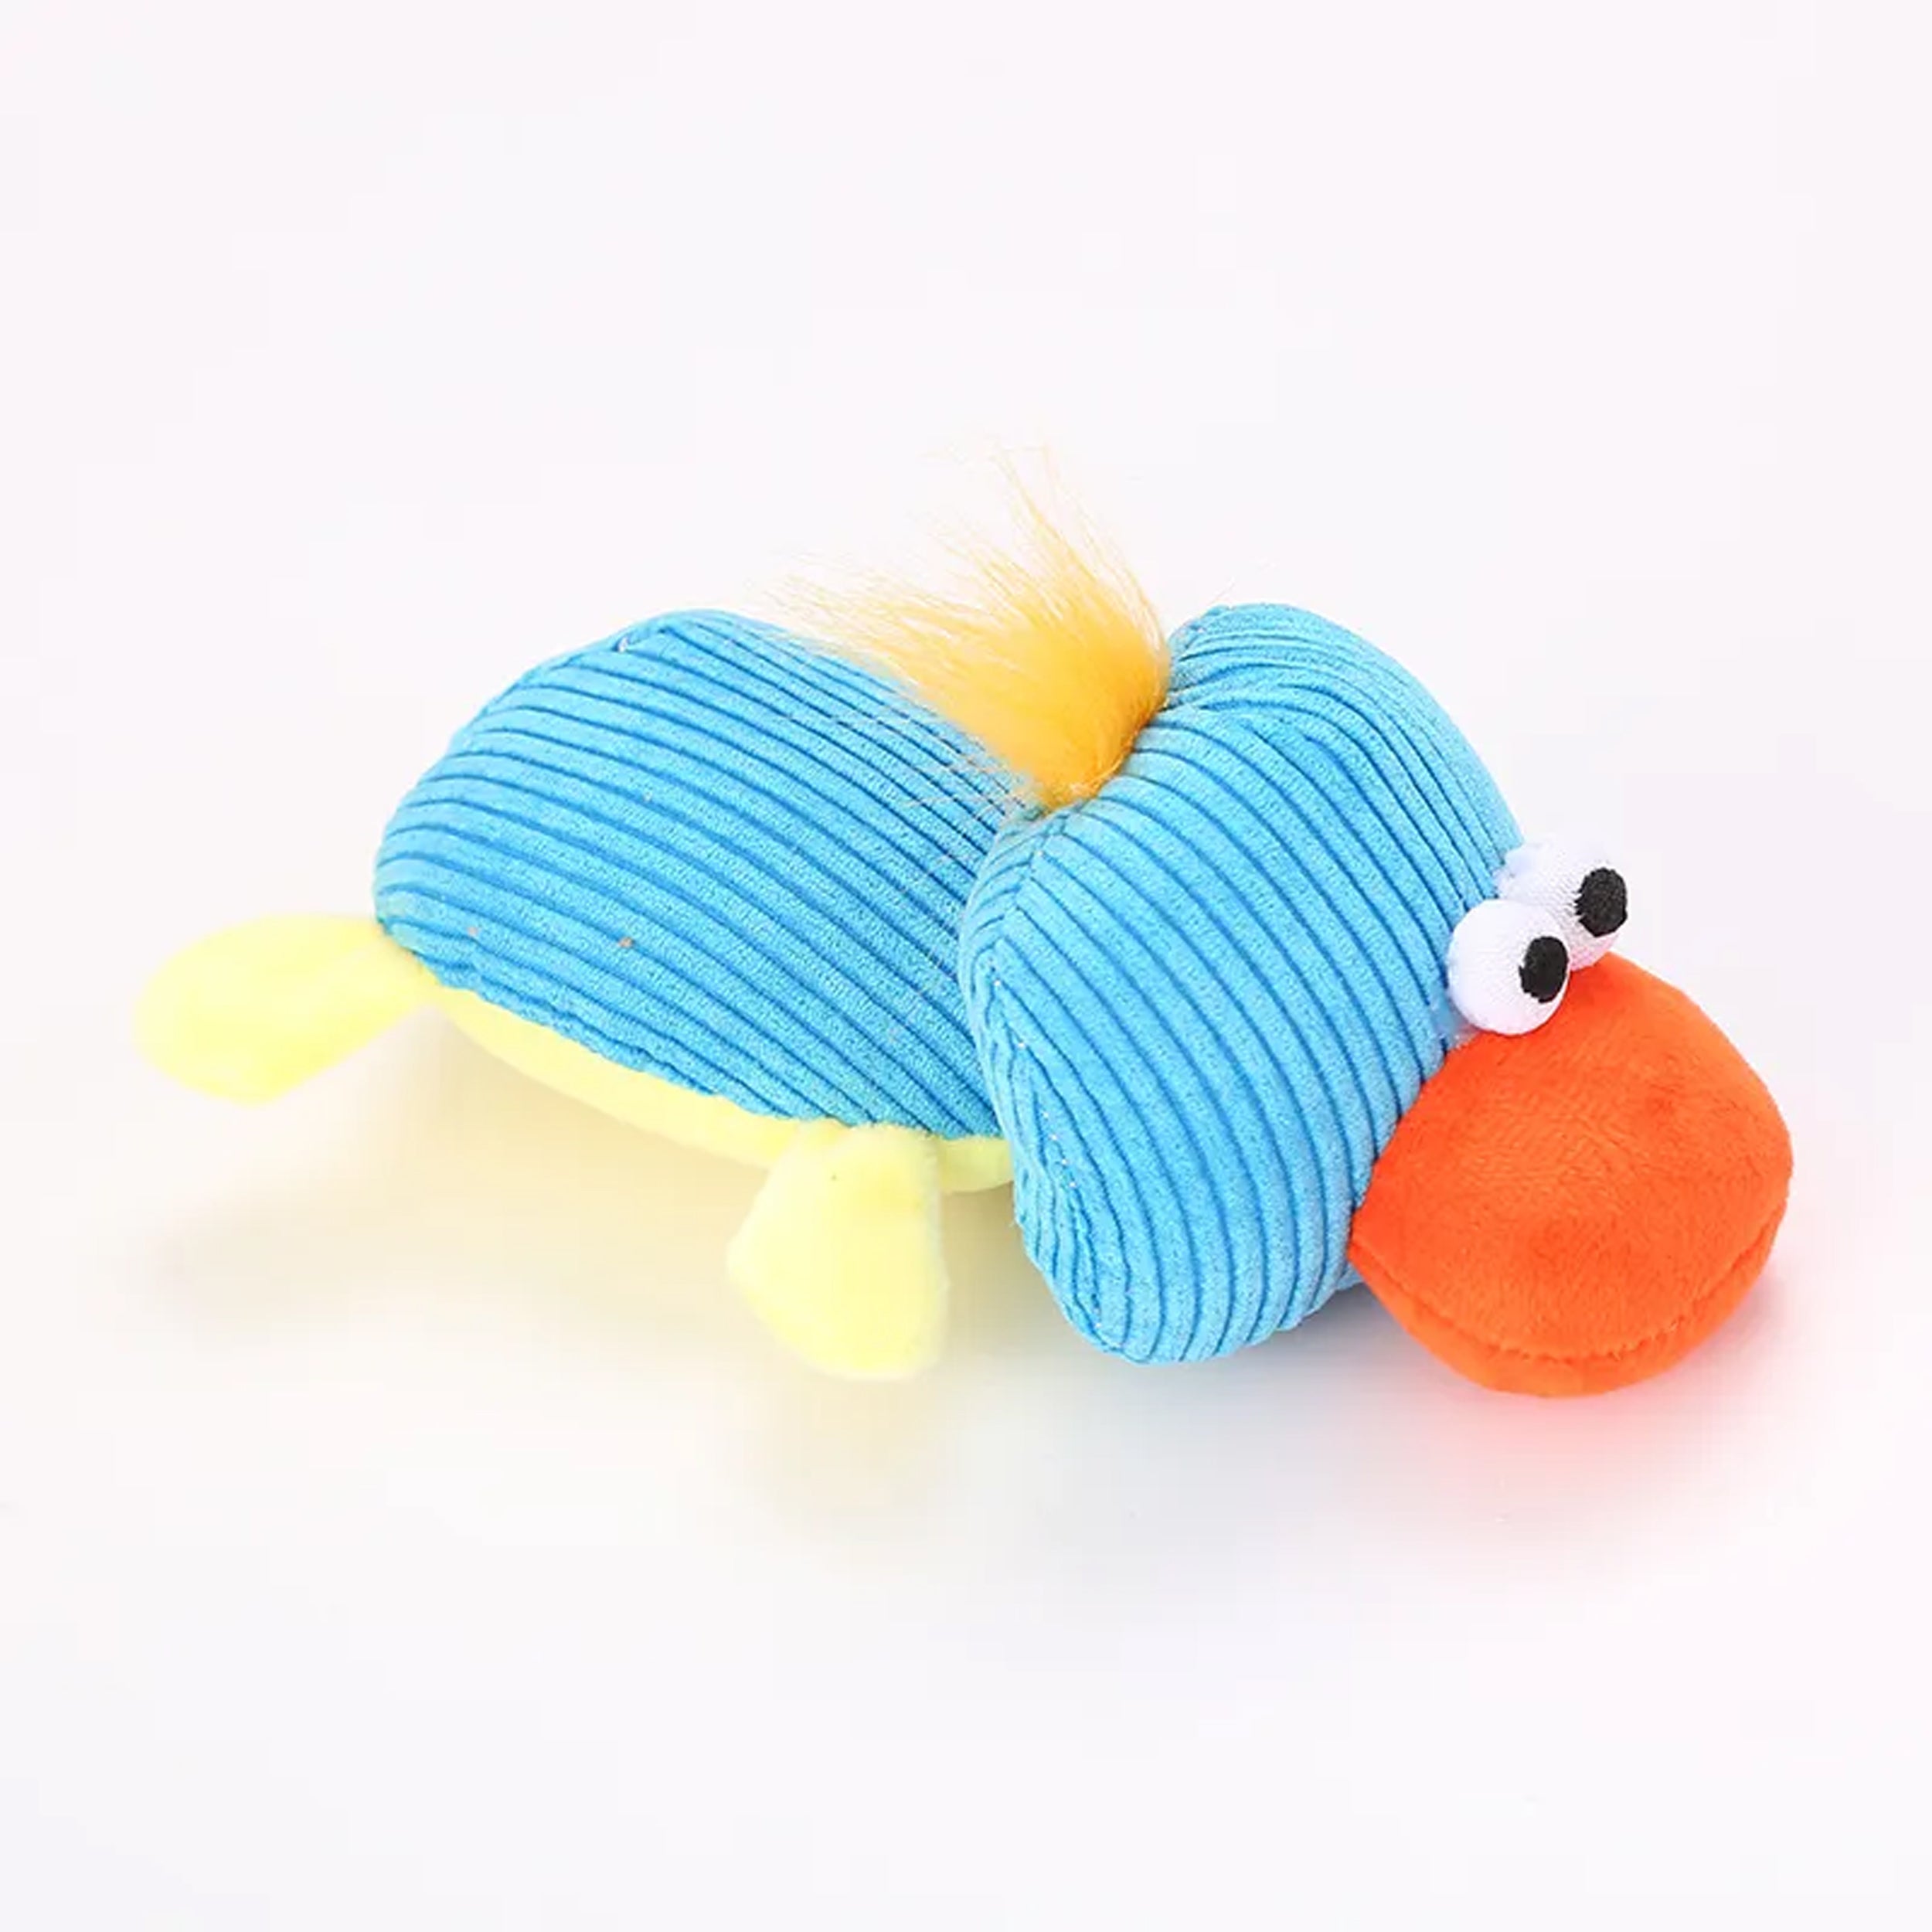 Affordable Animal Plush Pet Dog Chew Toy | Budget-Friendly Pet Toy